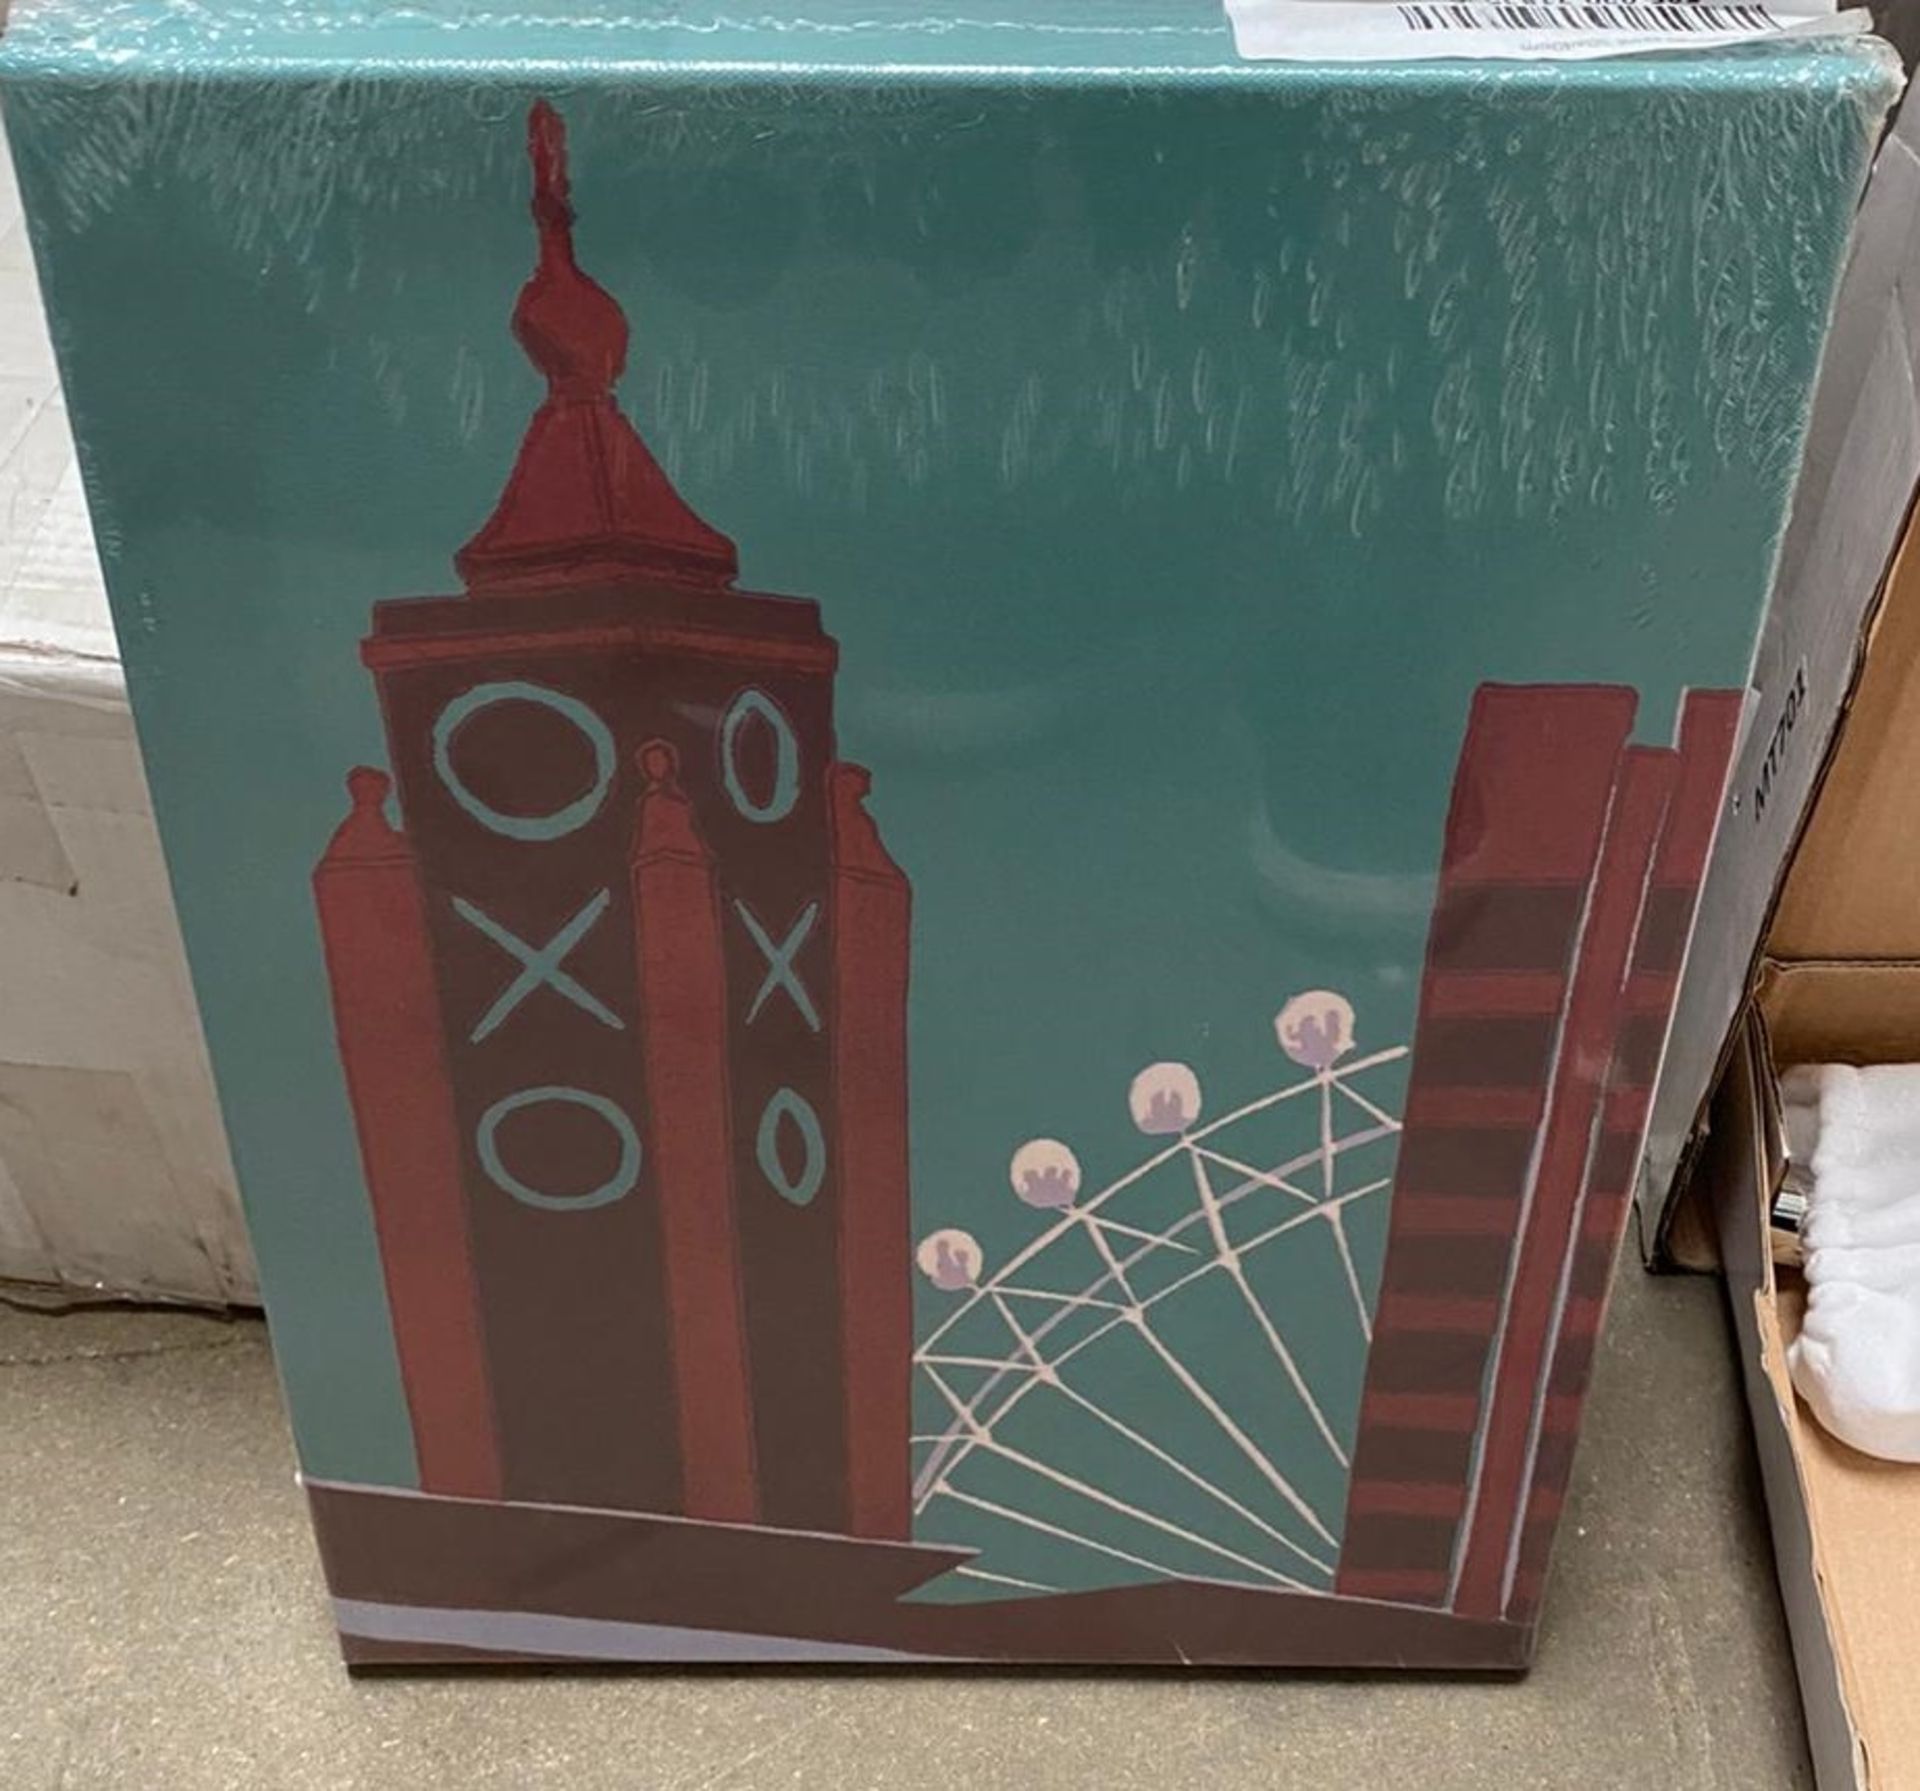 3 x Assorted Selection of City Canvas Prints from Summer Thornton and Jennie Ing - New Stock - - Image 6 of 6